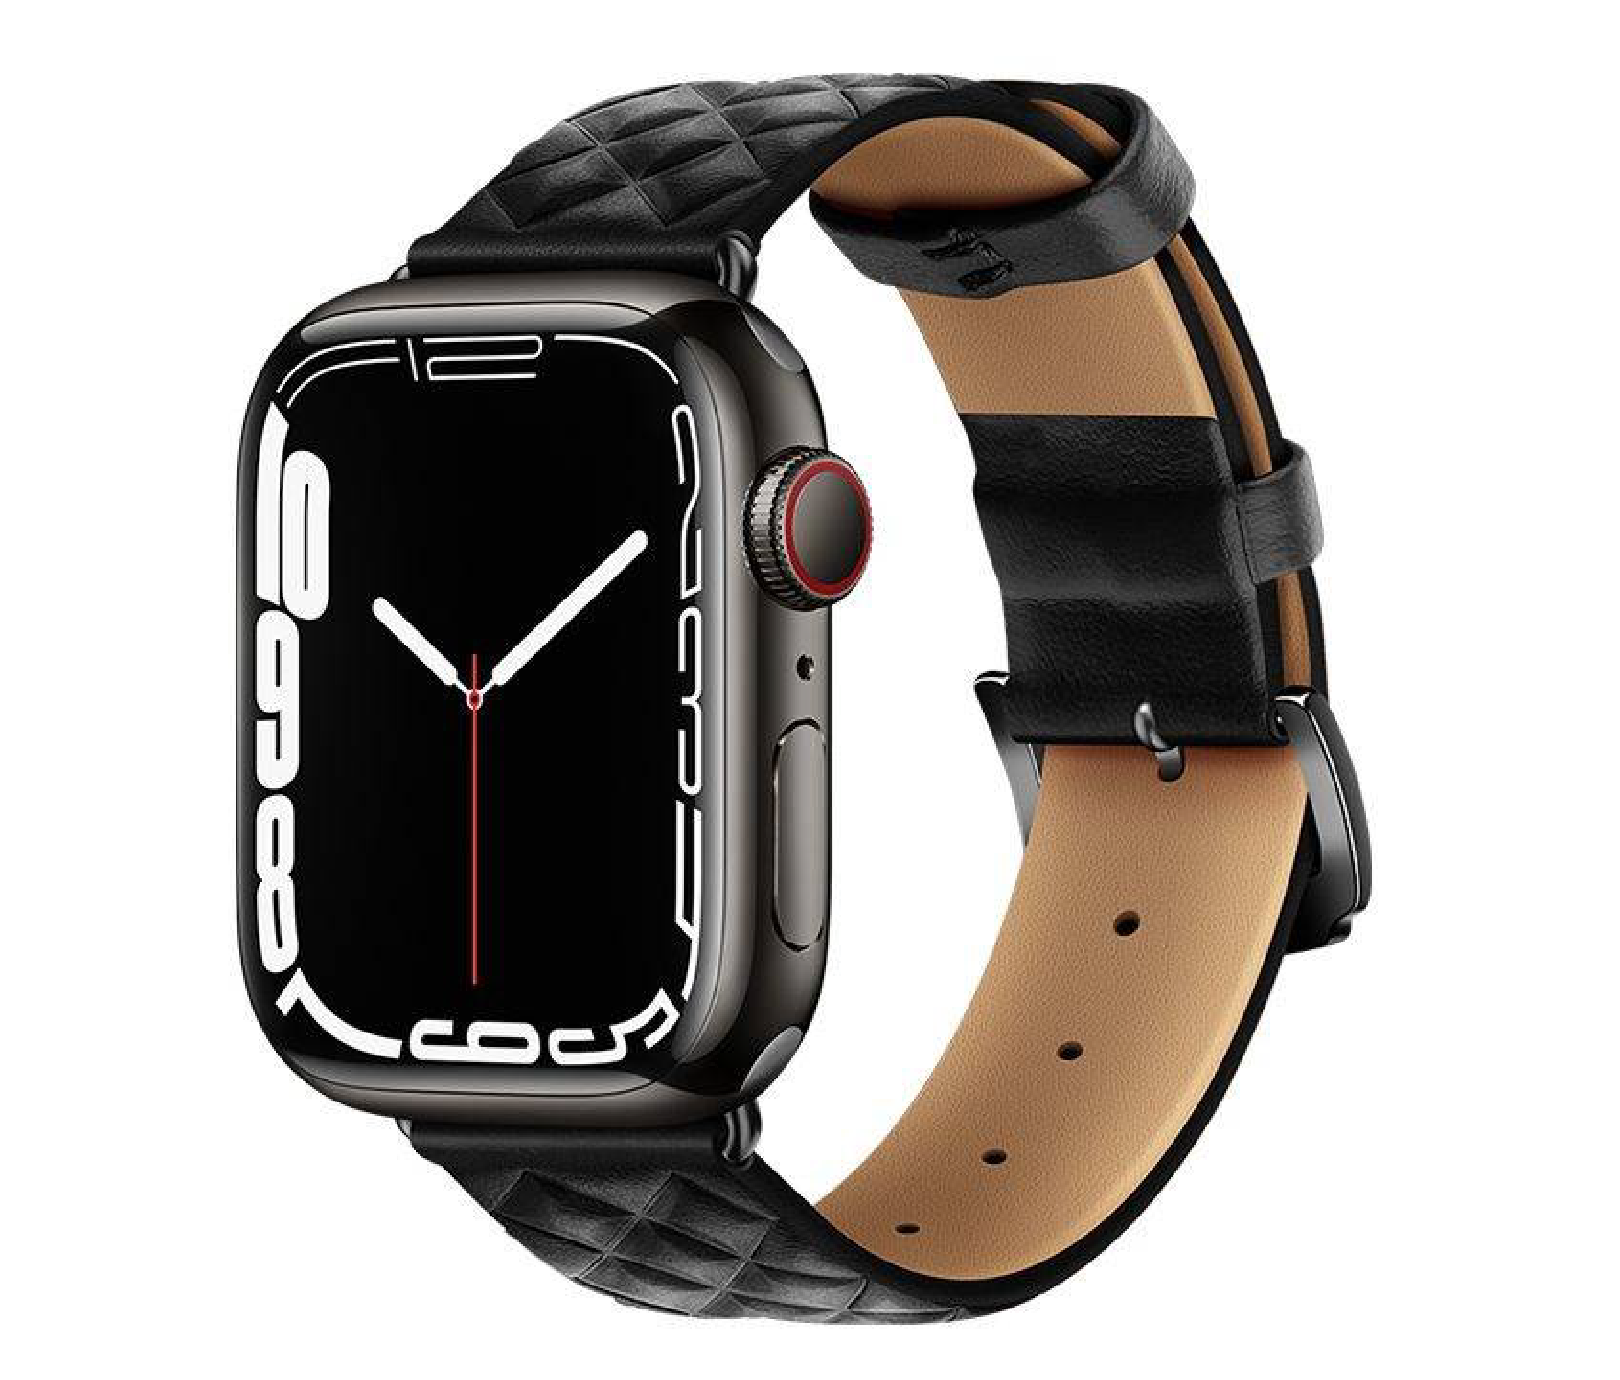 Correa Apple Watch APBL22S-S Black leather 22 mm - Small • Comerciante  oficial •